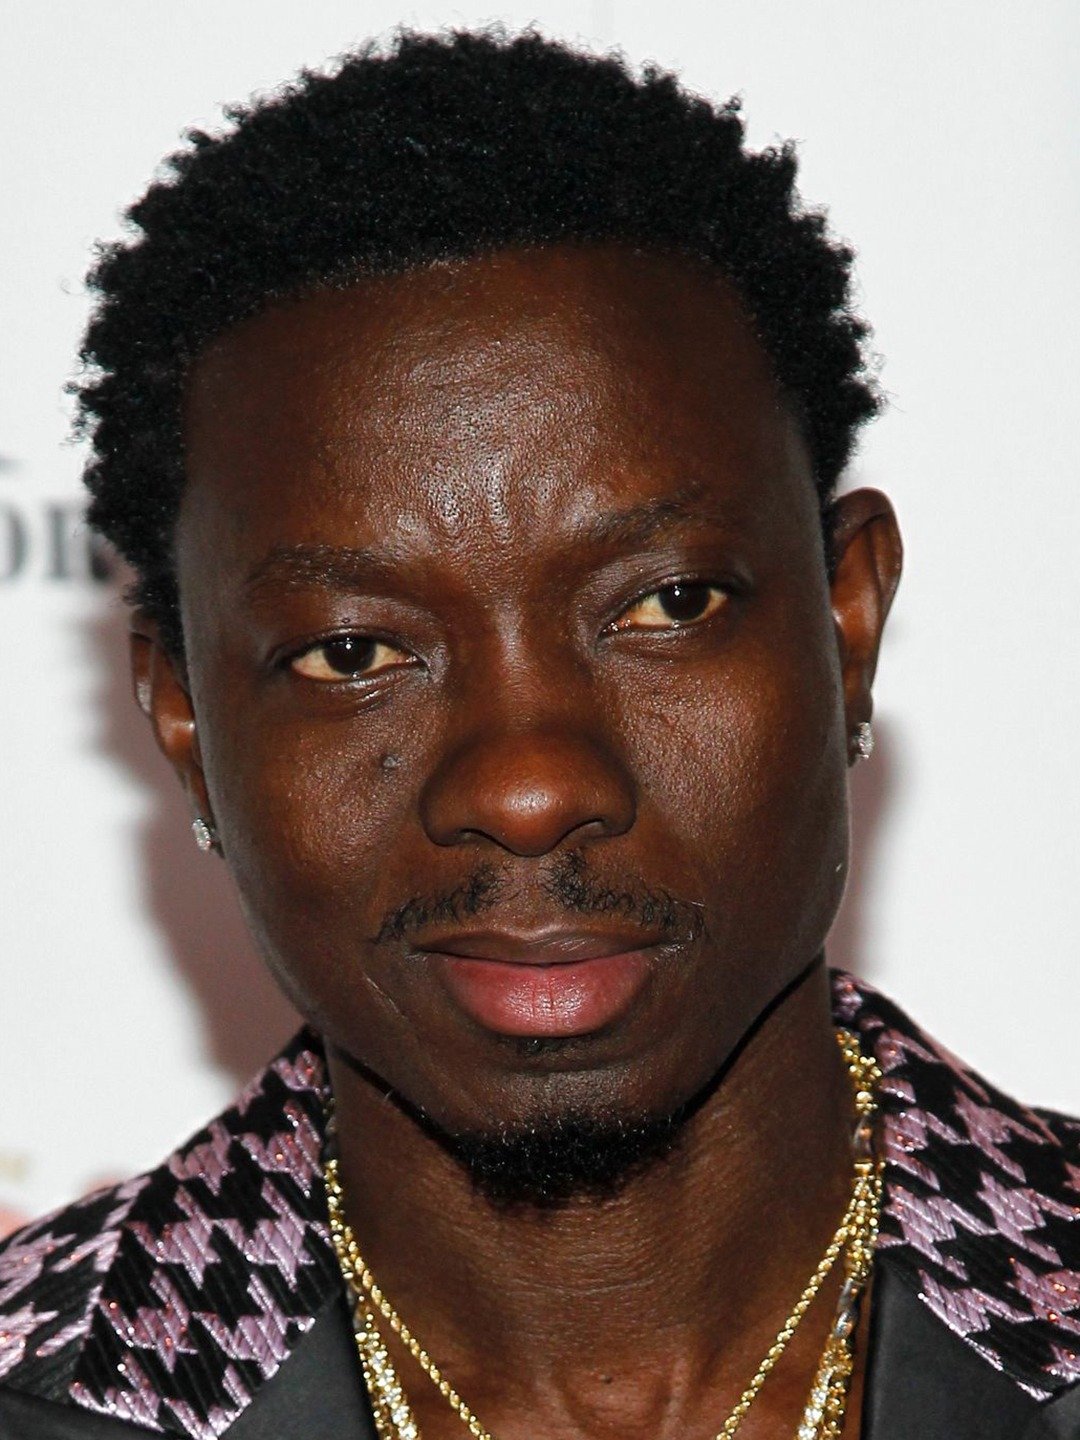 Comedian and Actor Michael Blackson to Host “THE BET SOCIAL AWARDS”